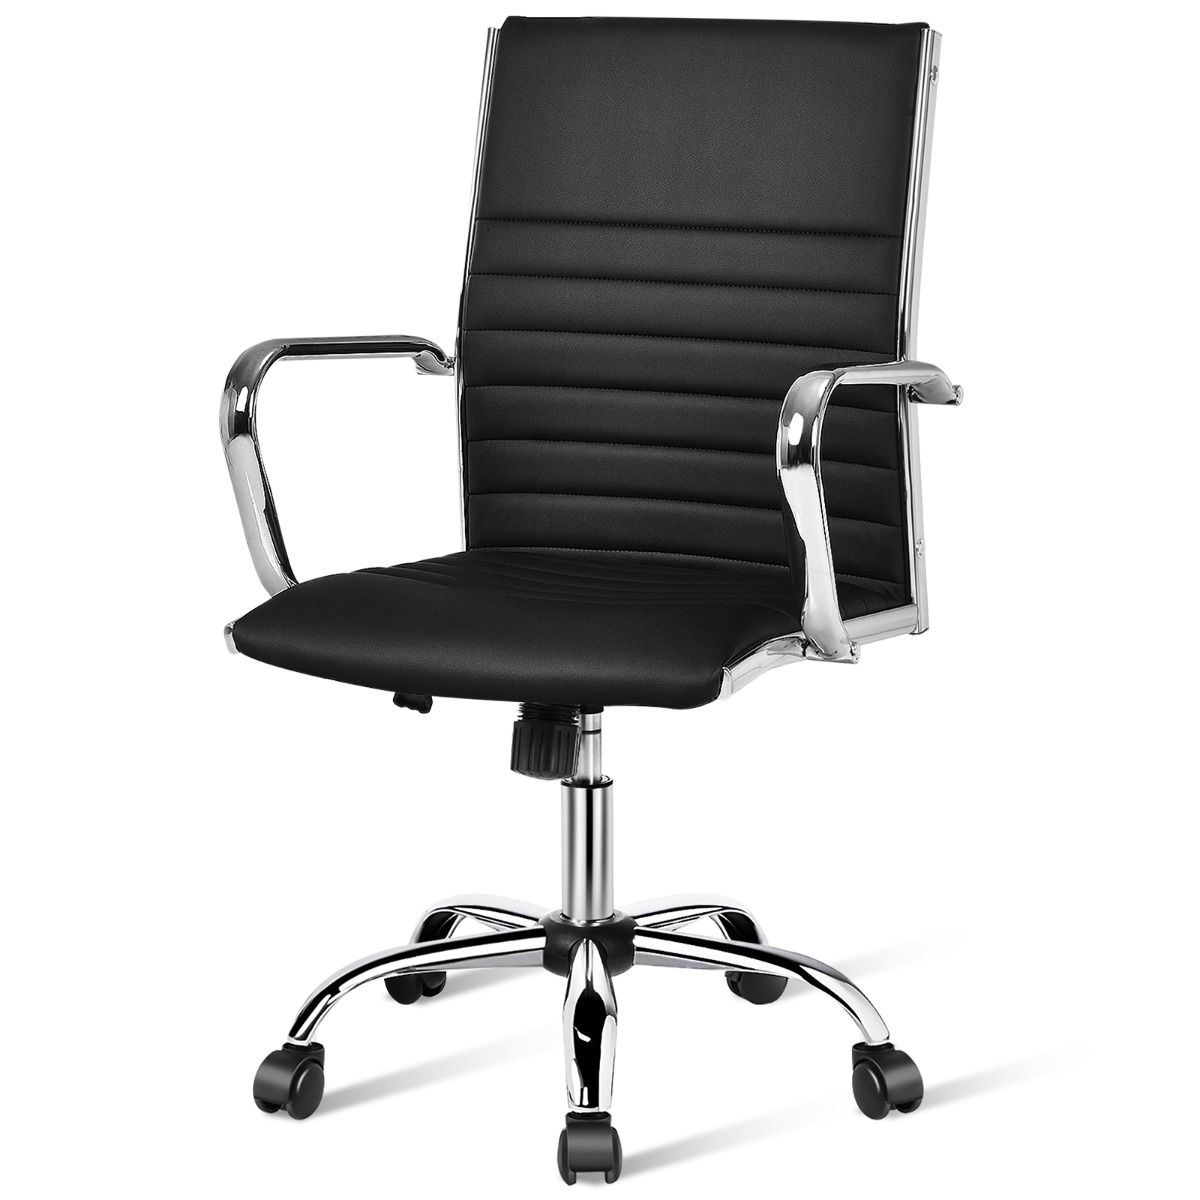 Height Adjustable Rolling High-Back Executive Chair for Home Office